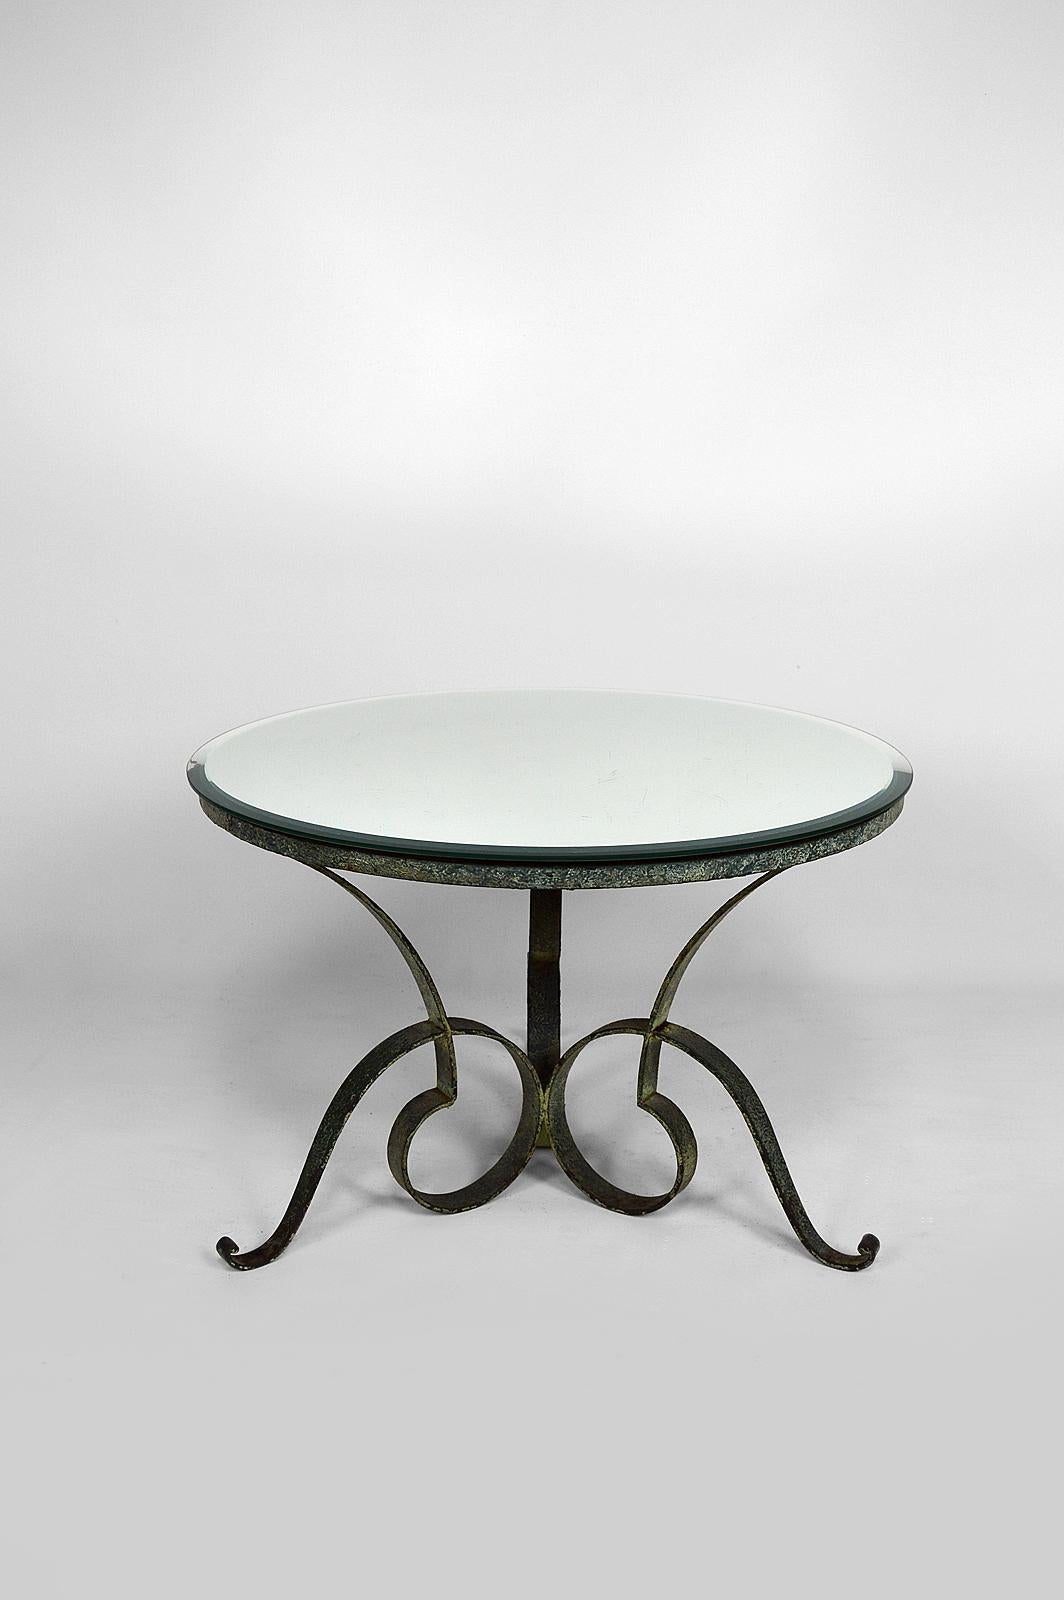 French Round Art Deco Coffee Table in Wrought Iron Attributed to Raymond Subes, 1935s